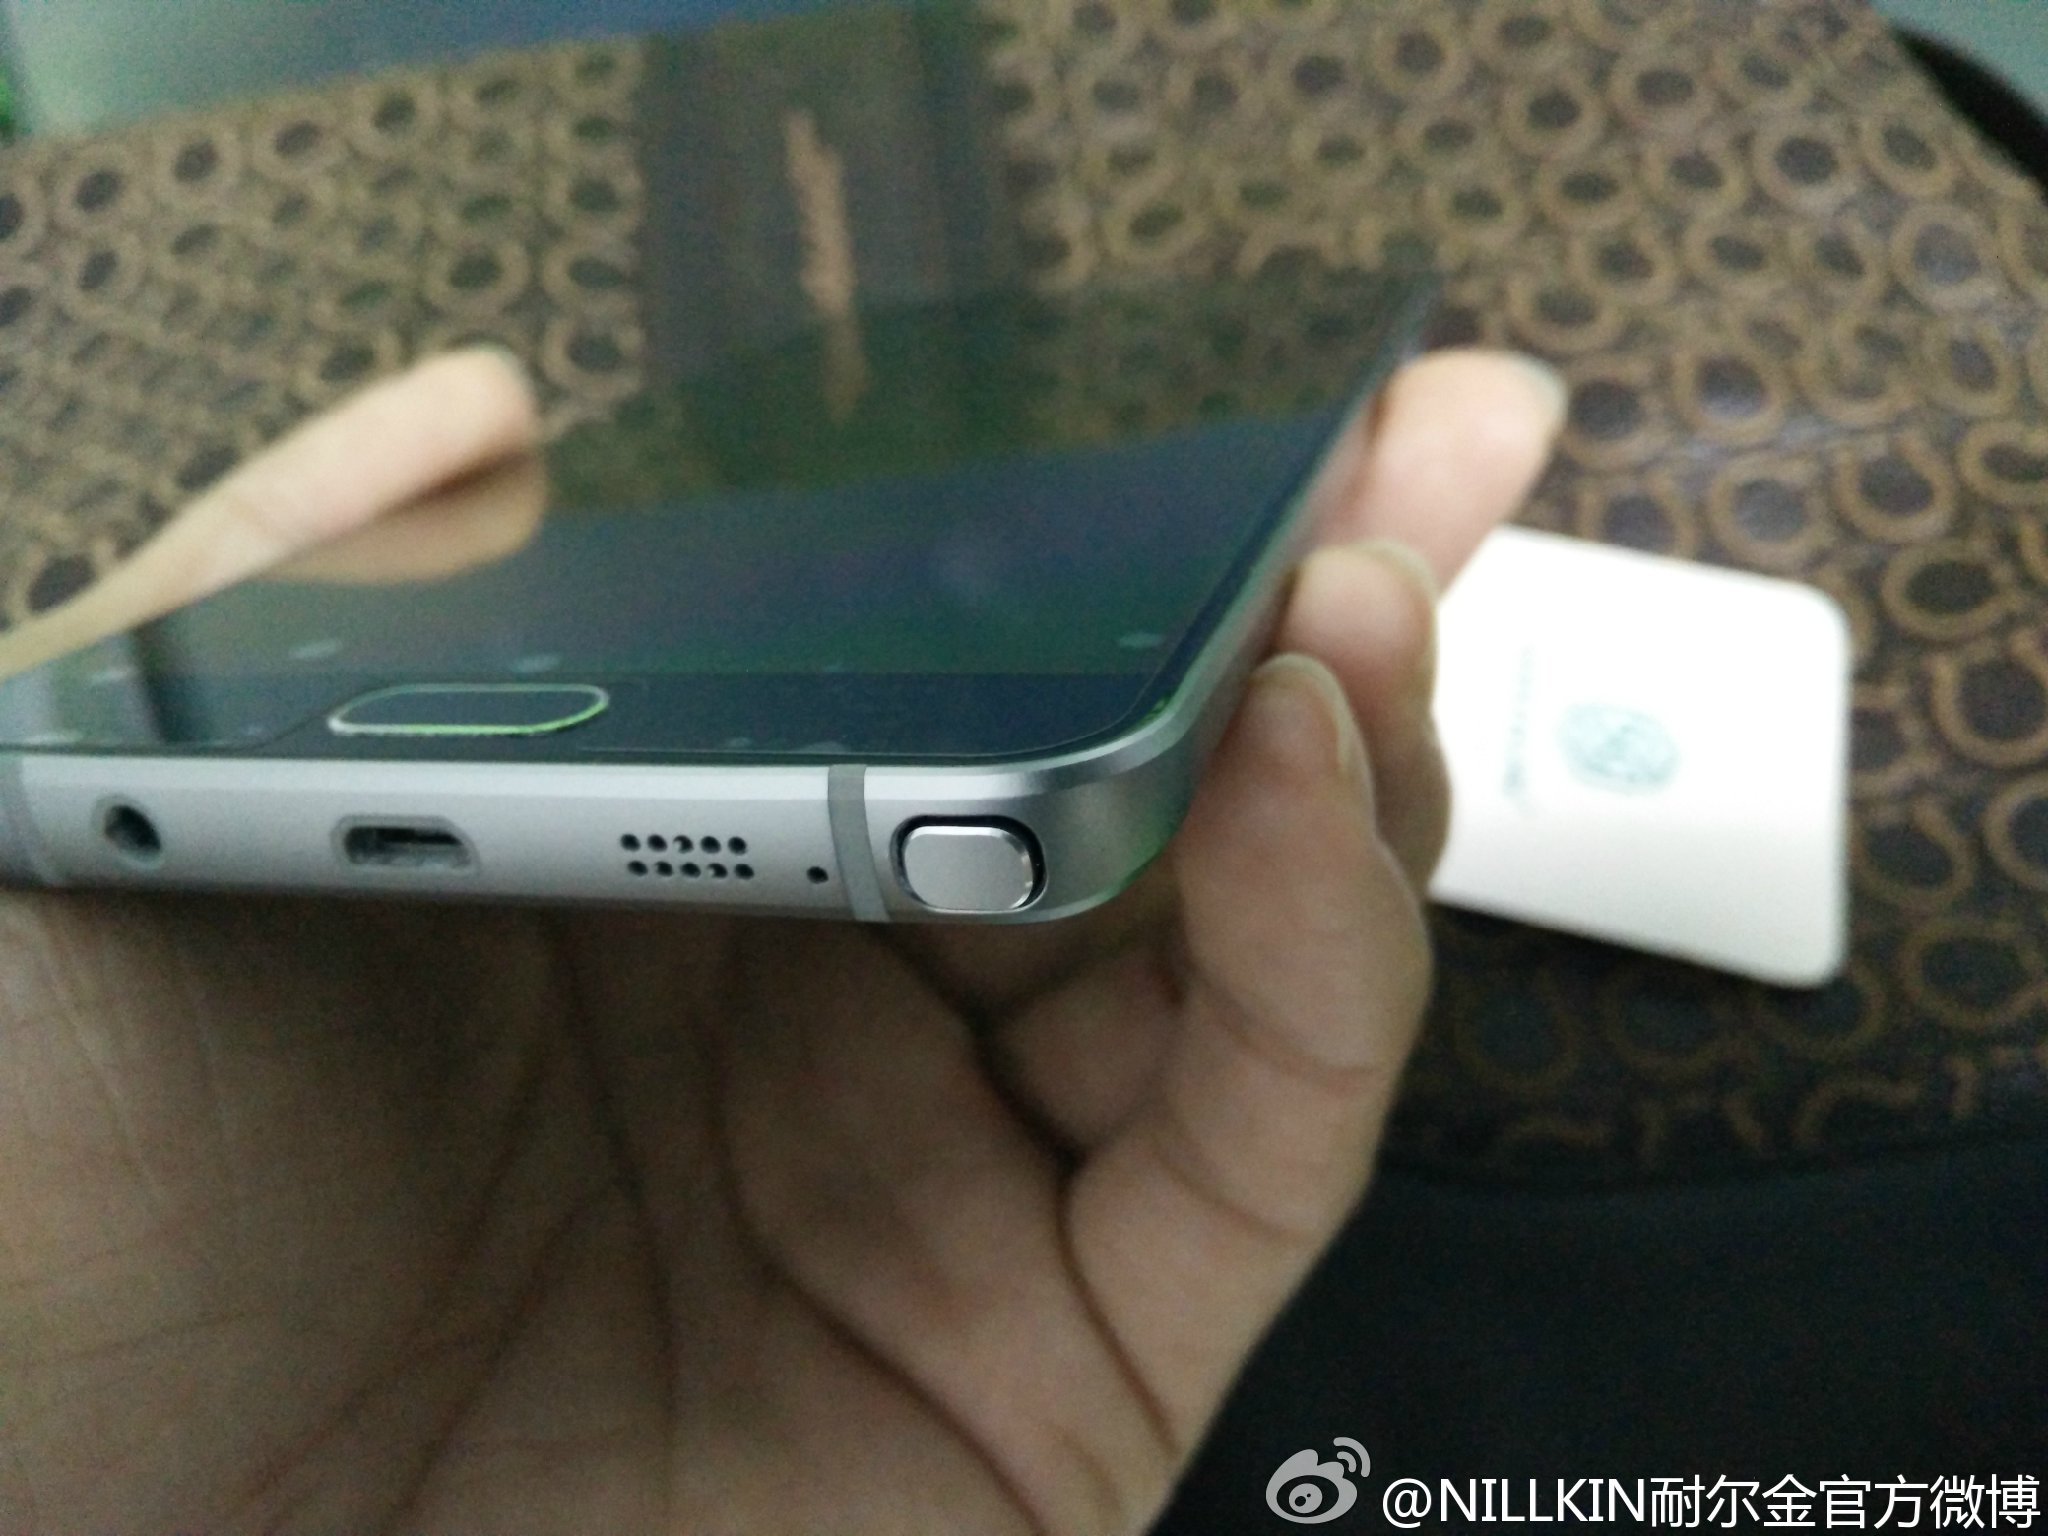 New Note 5 Leaks Don’t Leave Much For The Imagination